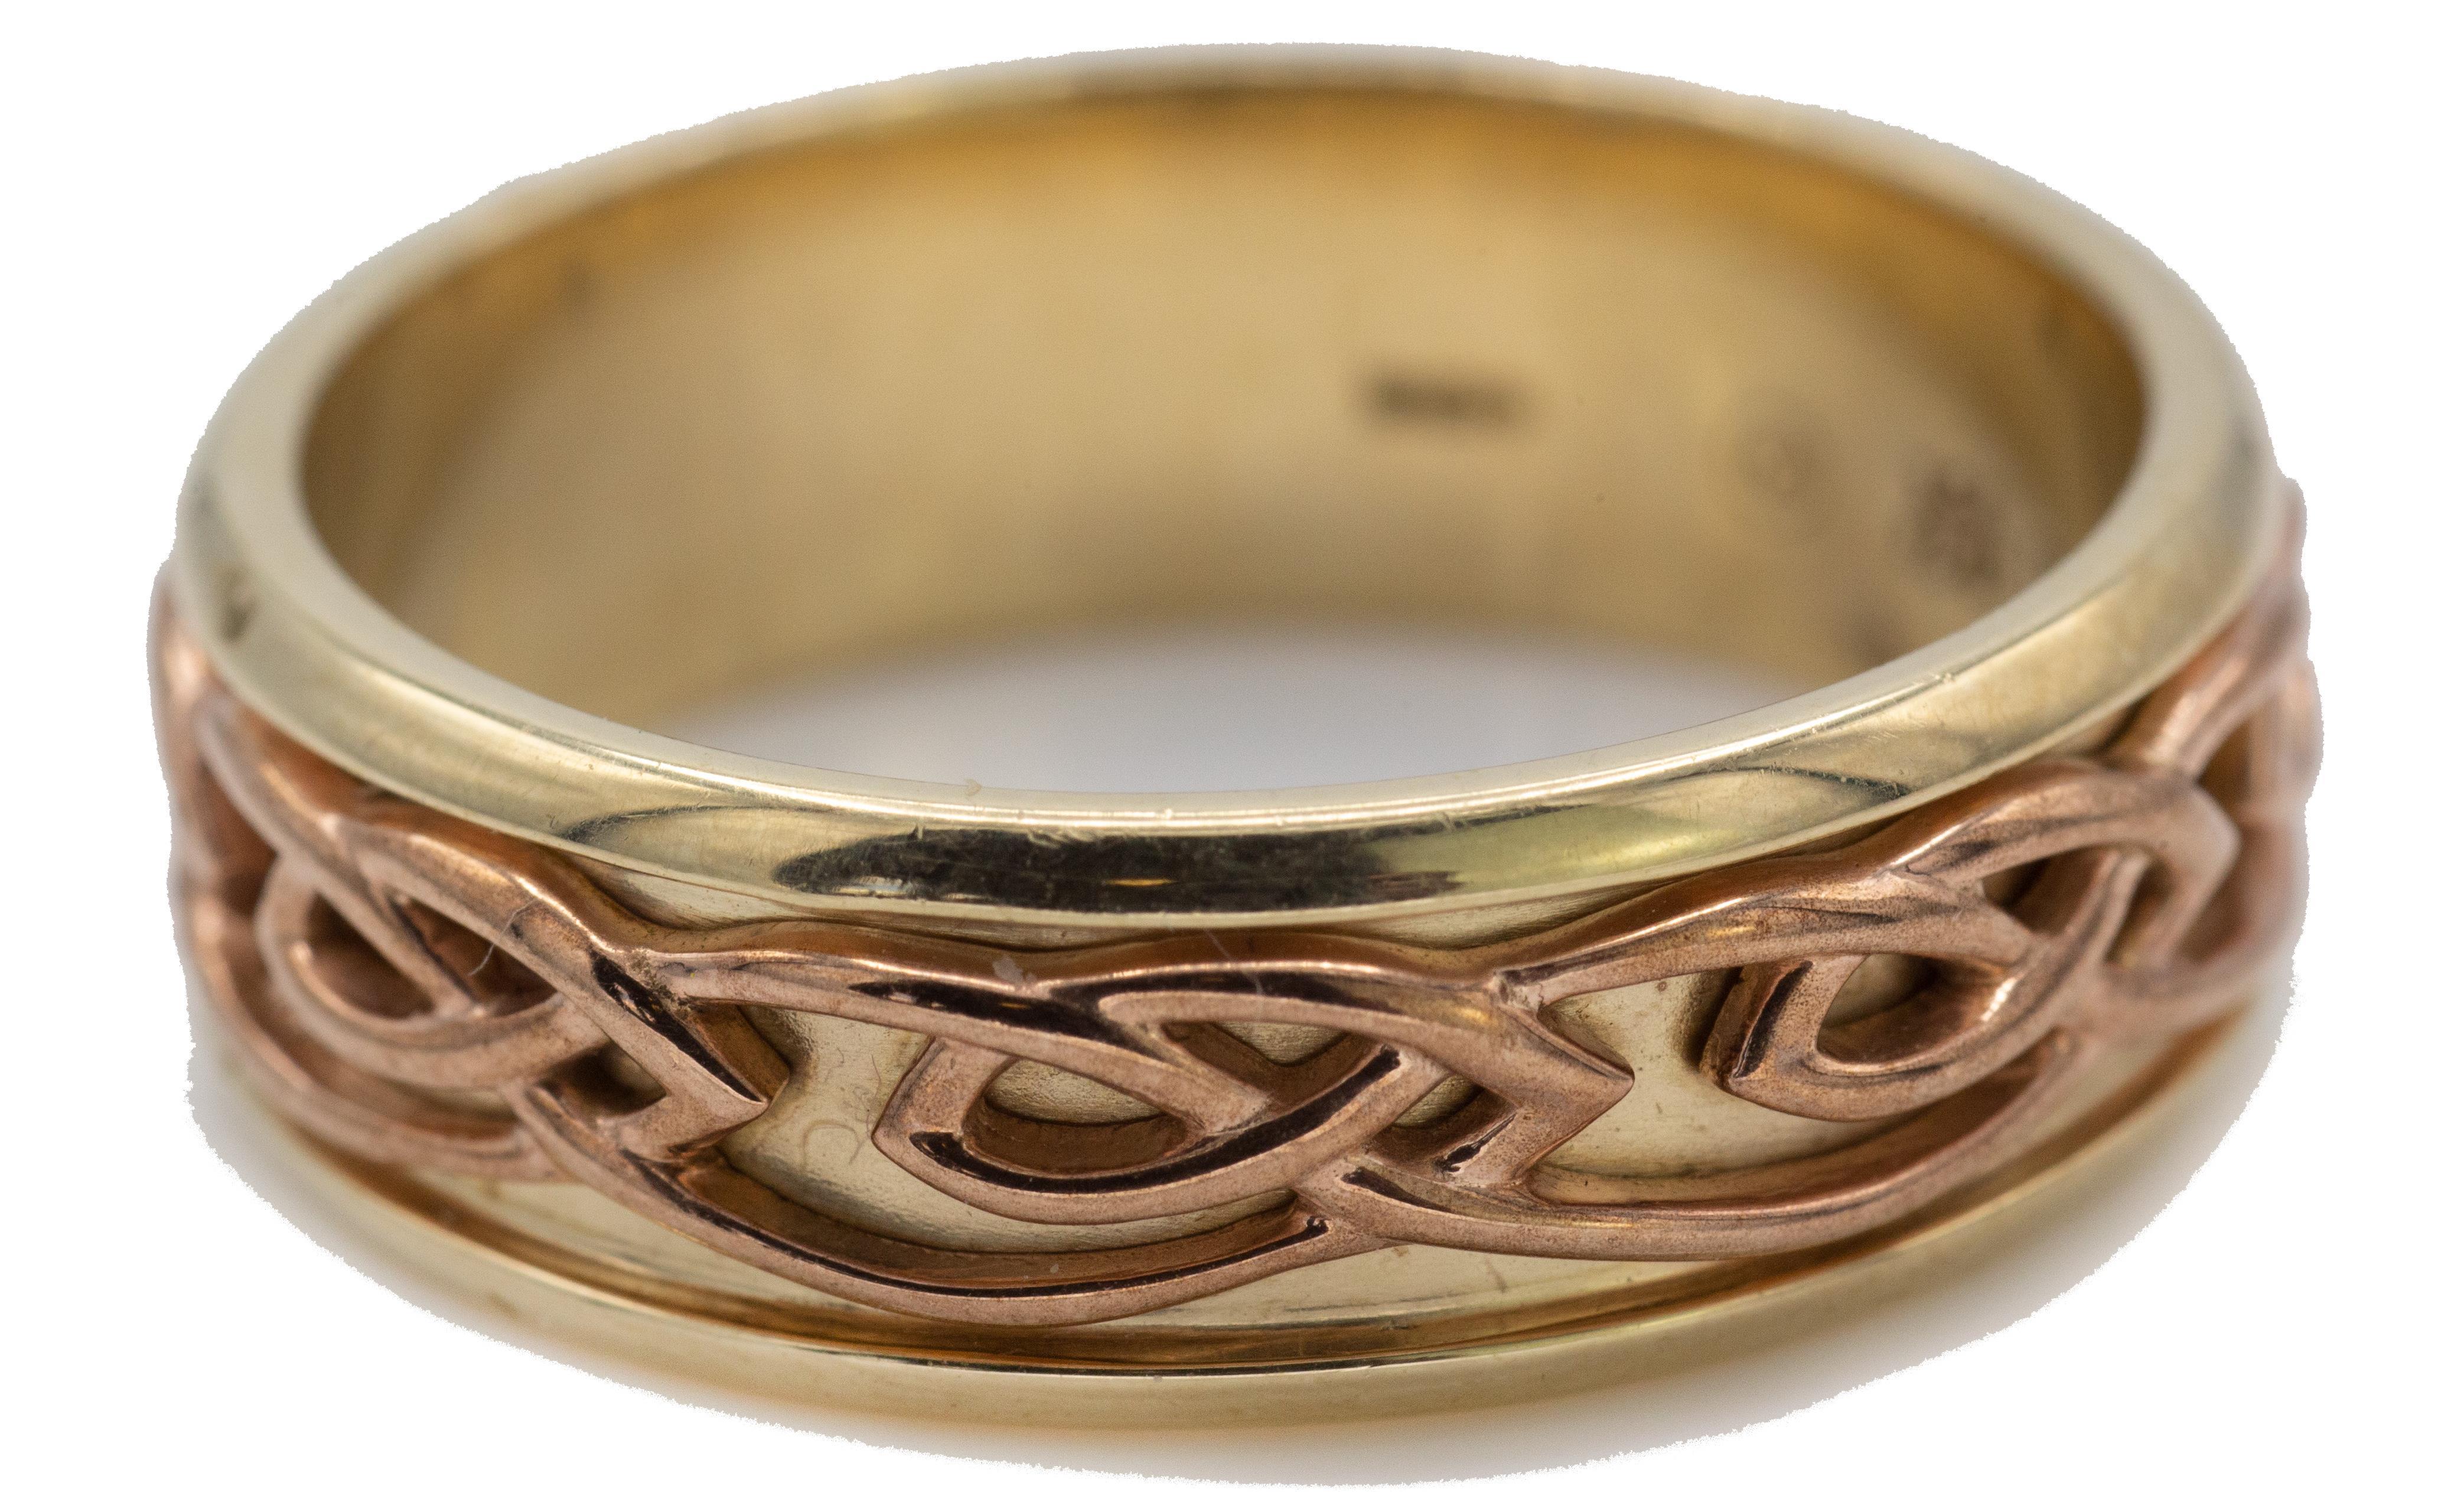 9ct Gold Hallmarked Clogau Annwyl Band Ring - Image 2 of 4